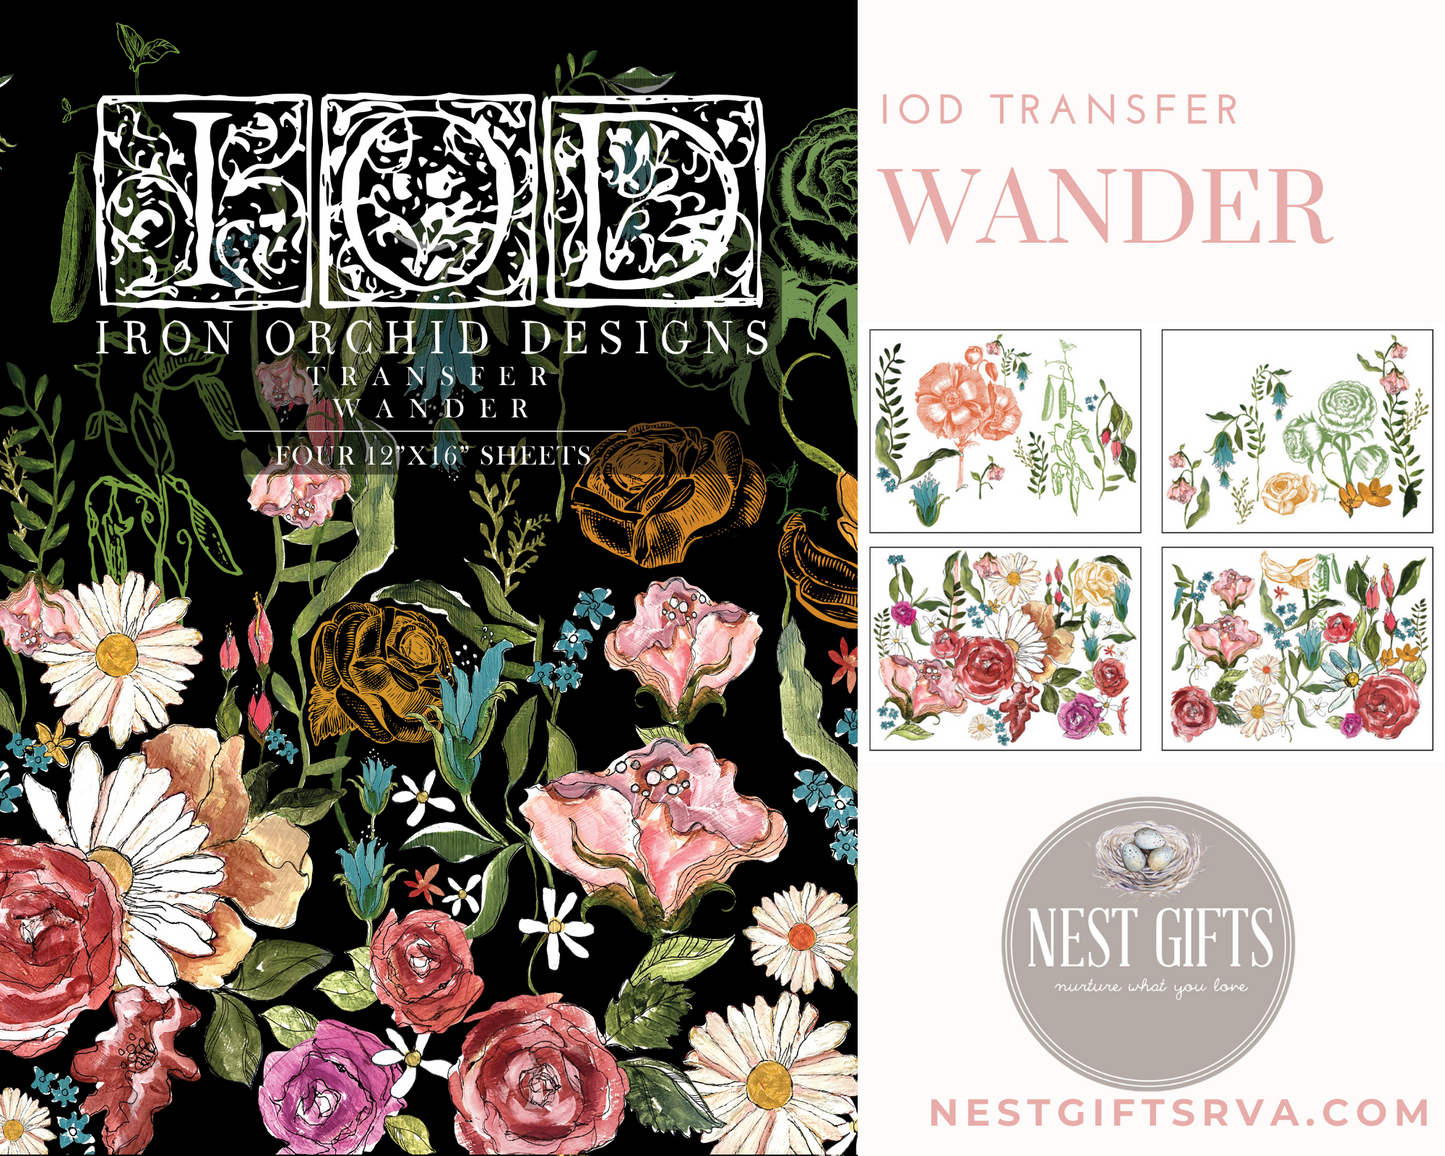 IOD Wander Transfer by Iron Orchid Designs